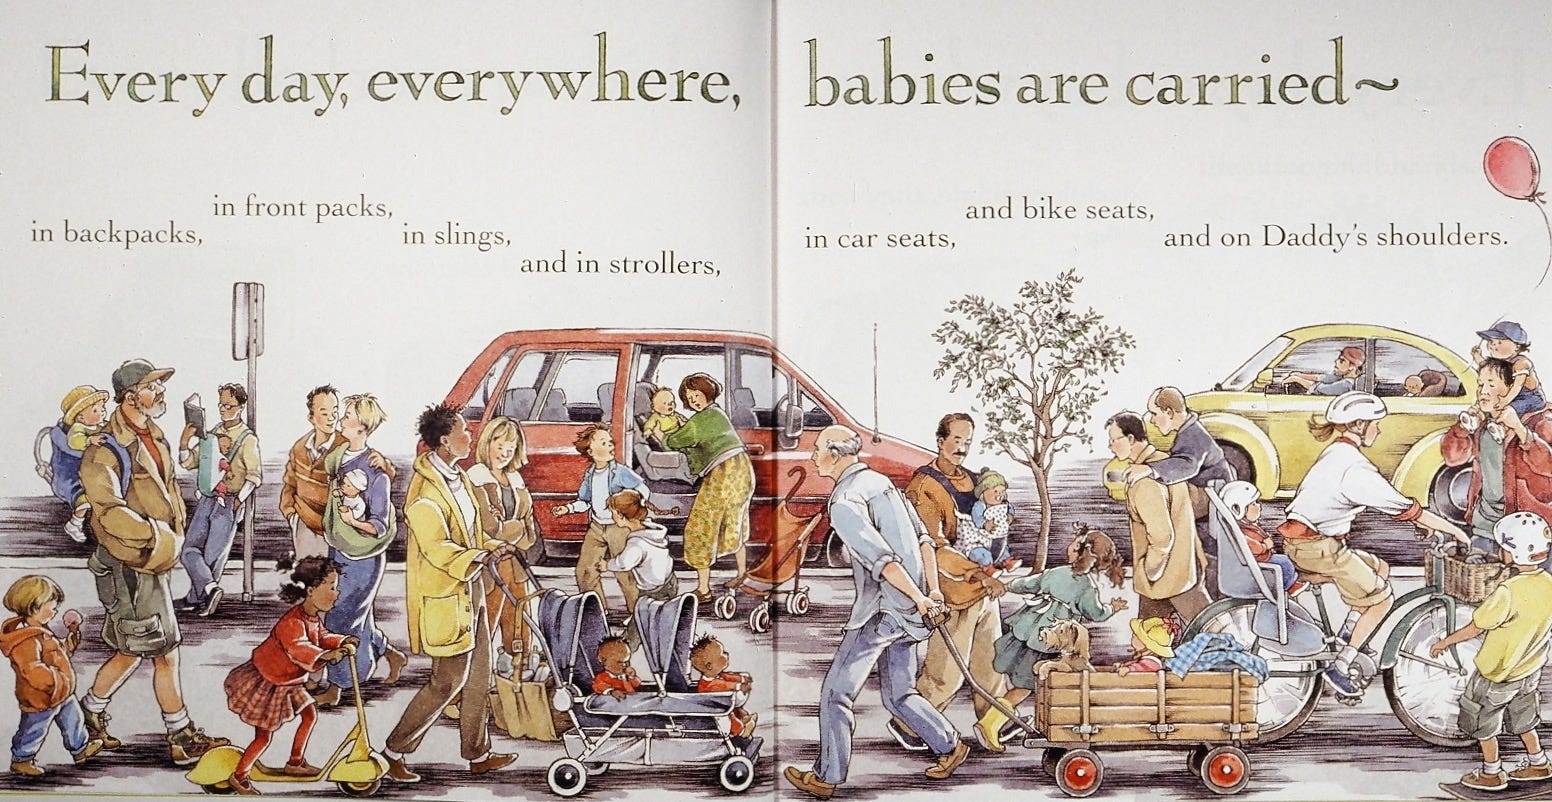 Florida group wants schools to ban children's book 'Everywhere Babies'